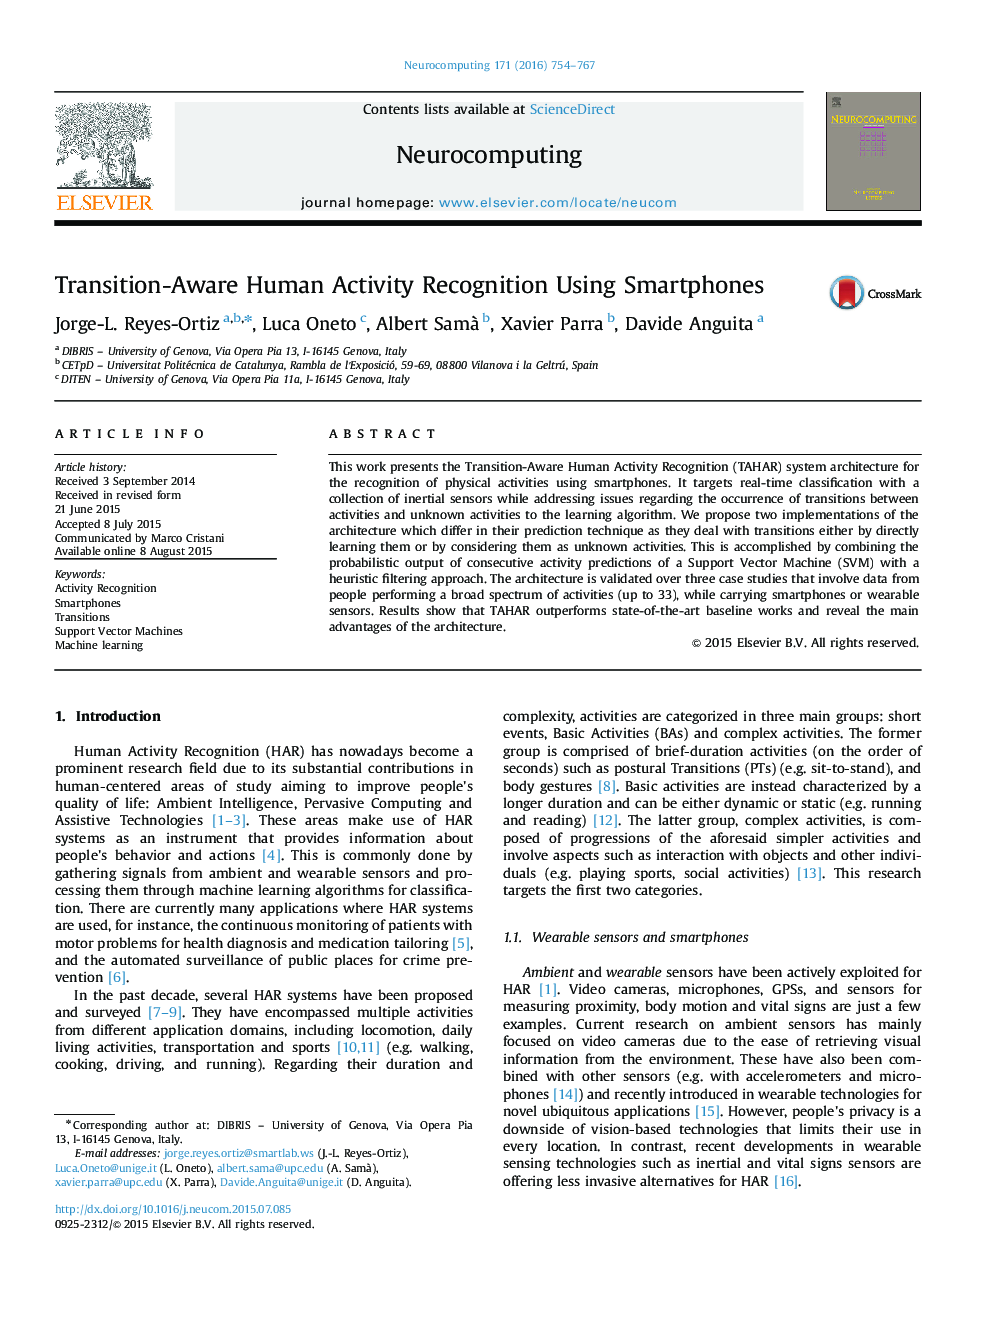 Transition-Aware Human Activity Recognition Using Smartphones